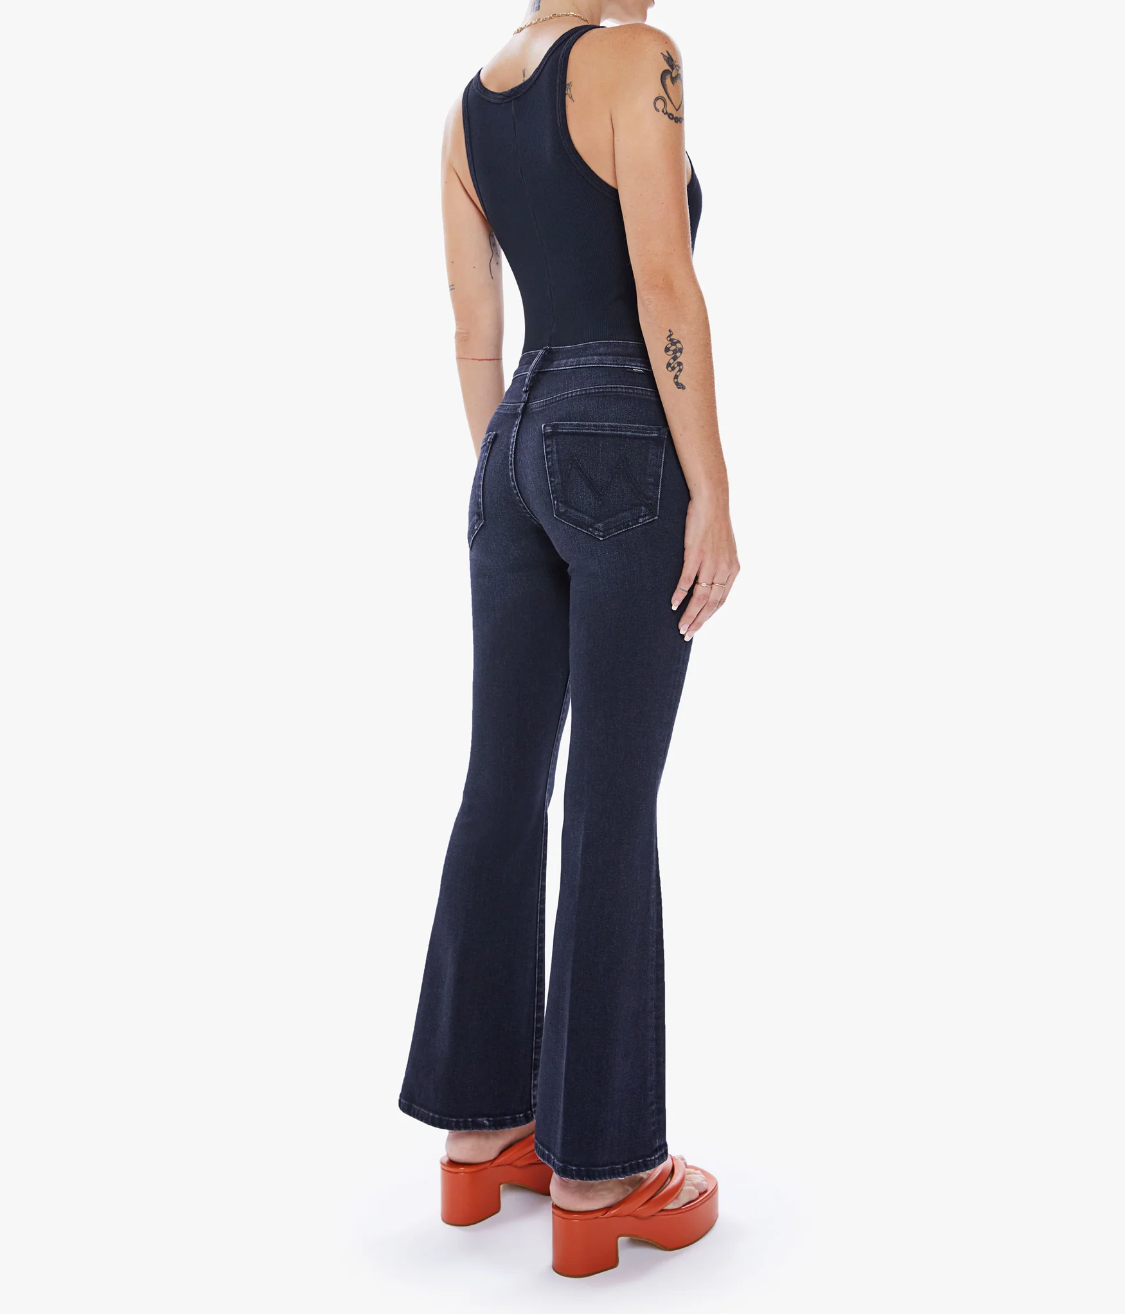 rear view of the weekender flare jean in deep end black, styled with a black tank and orange sandals